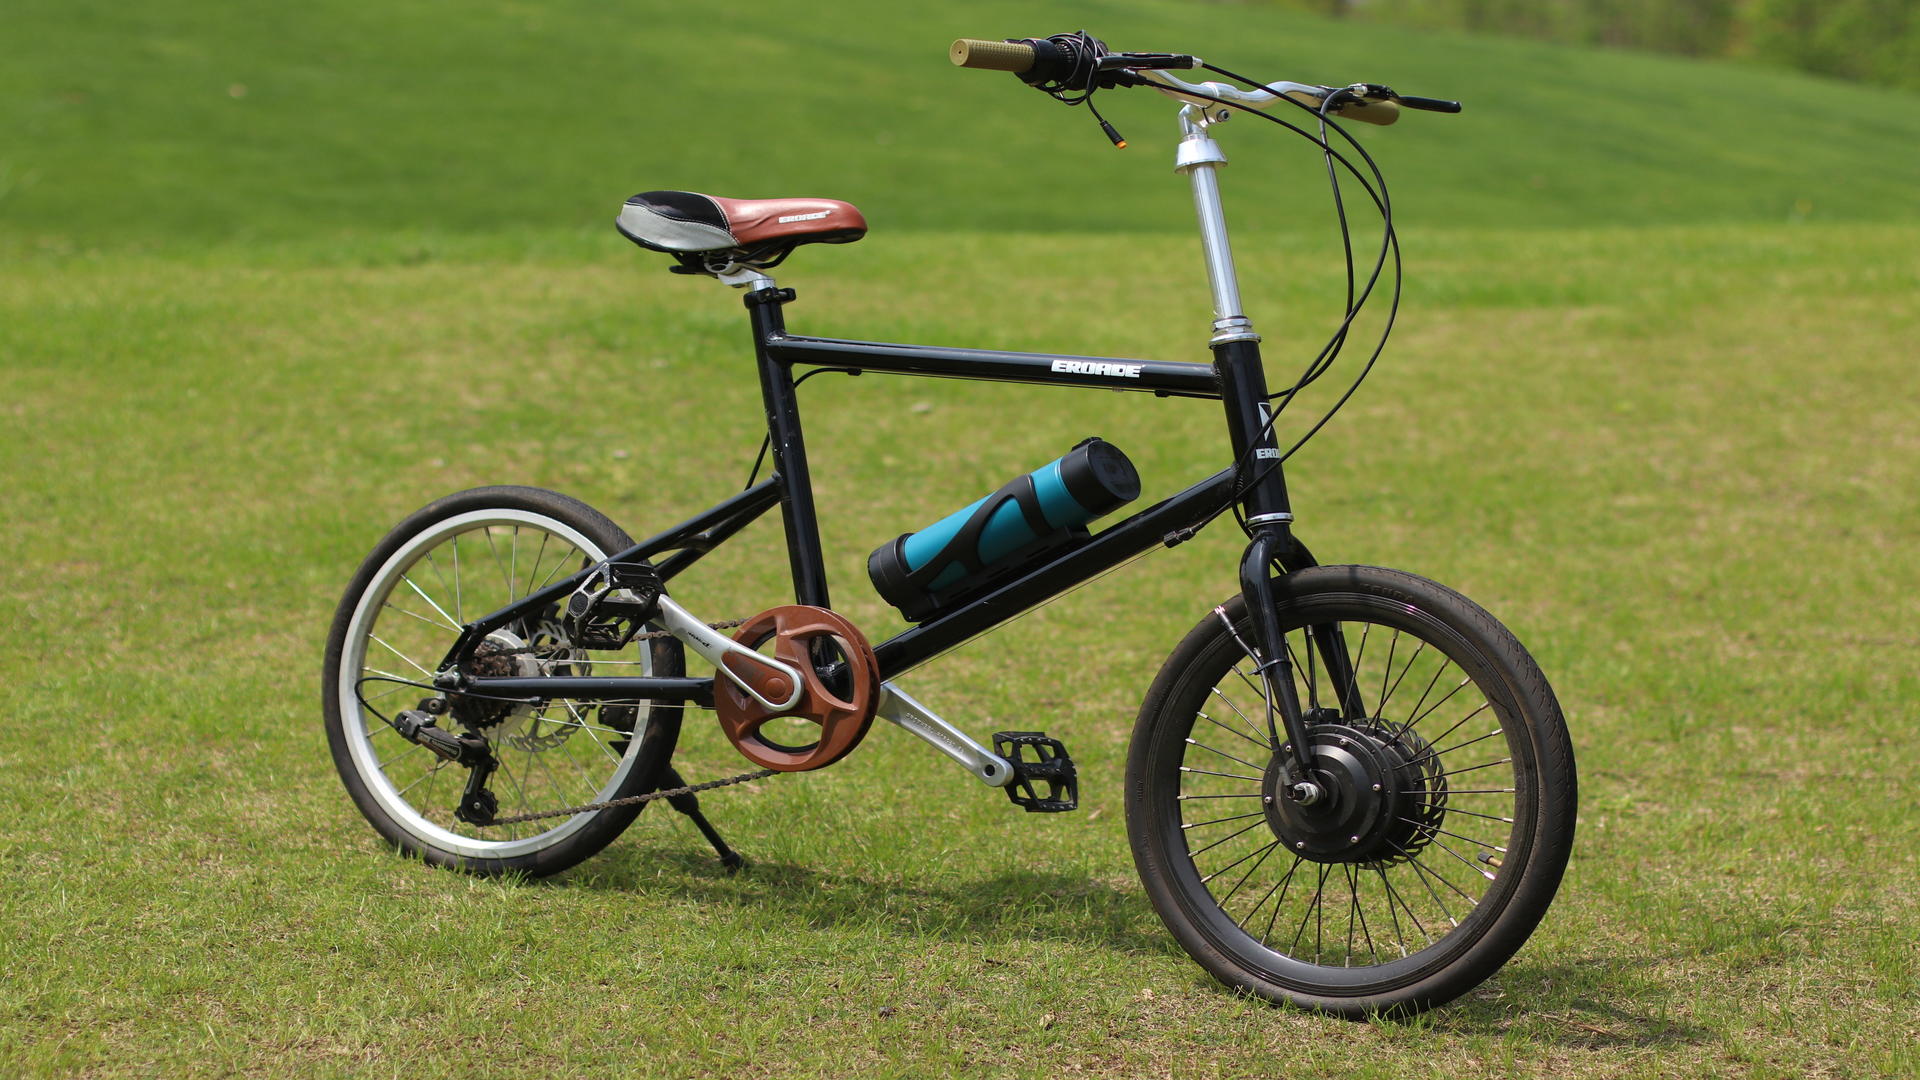 Using an electric-assist bike for training can enhance your skills and fitness